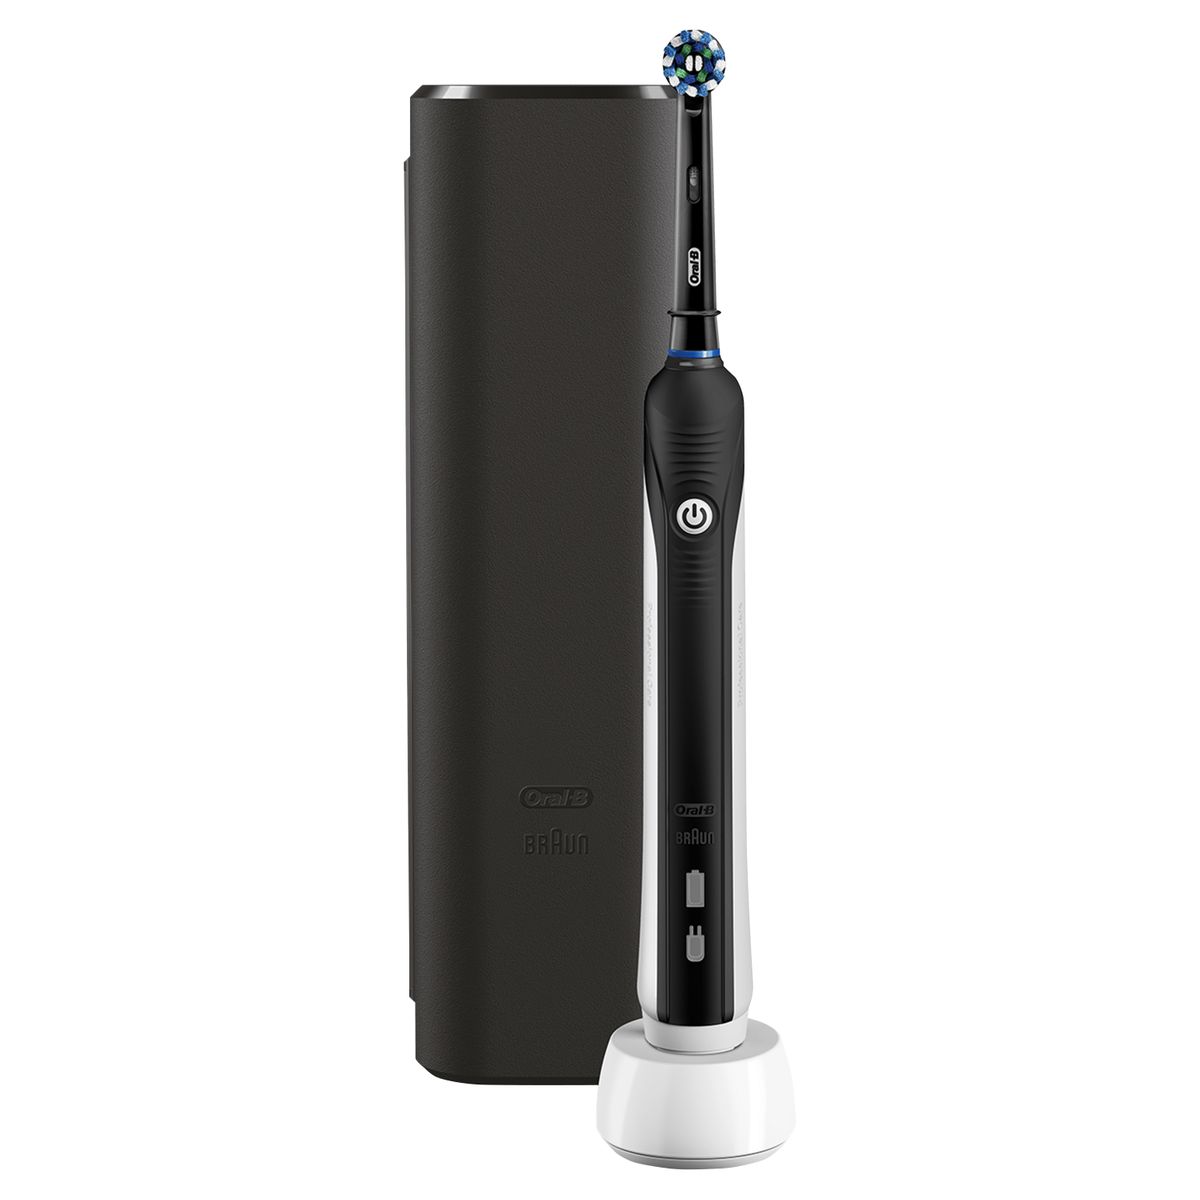 Oral-B PRO 2 2500 Electric Toothbrush/Electric Toothbrush, with 2 brushing modes and visual pressure control for dental care, travel case, Designed by Braun, black Single